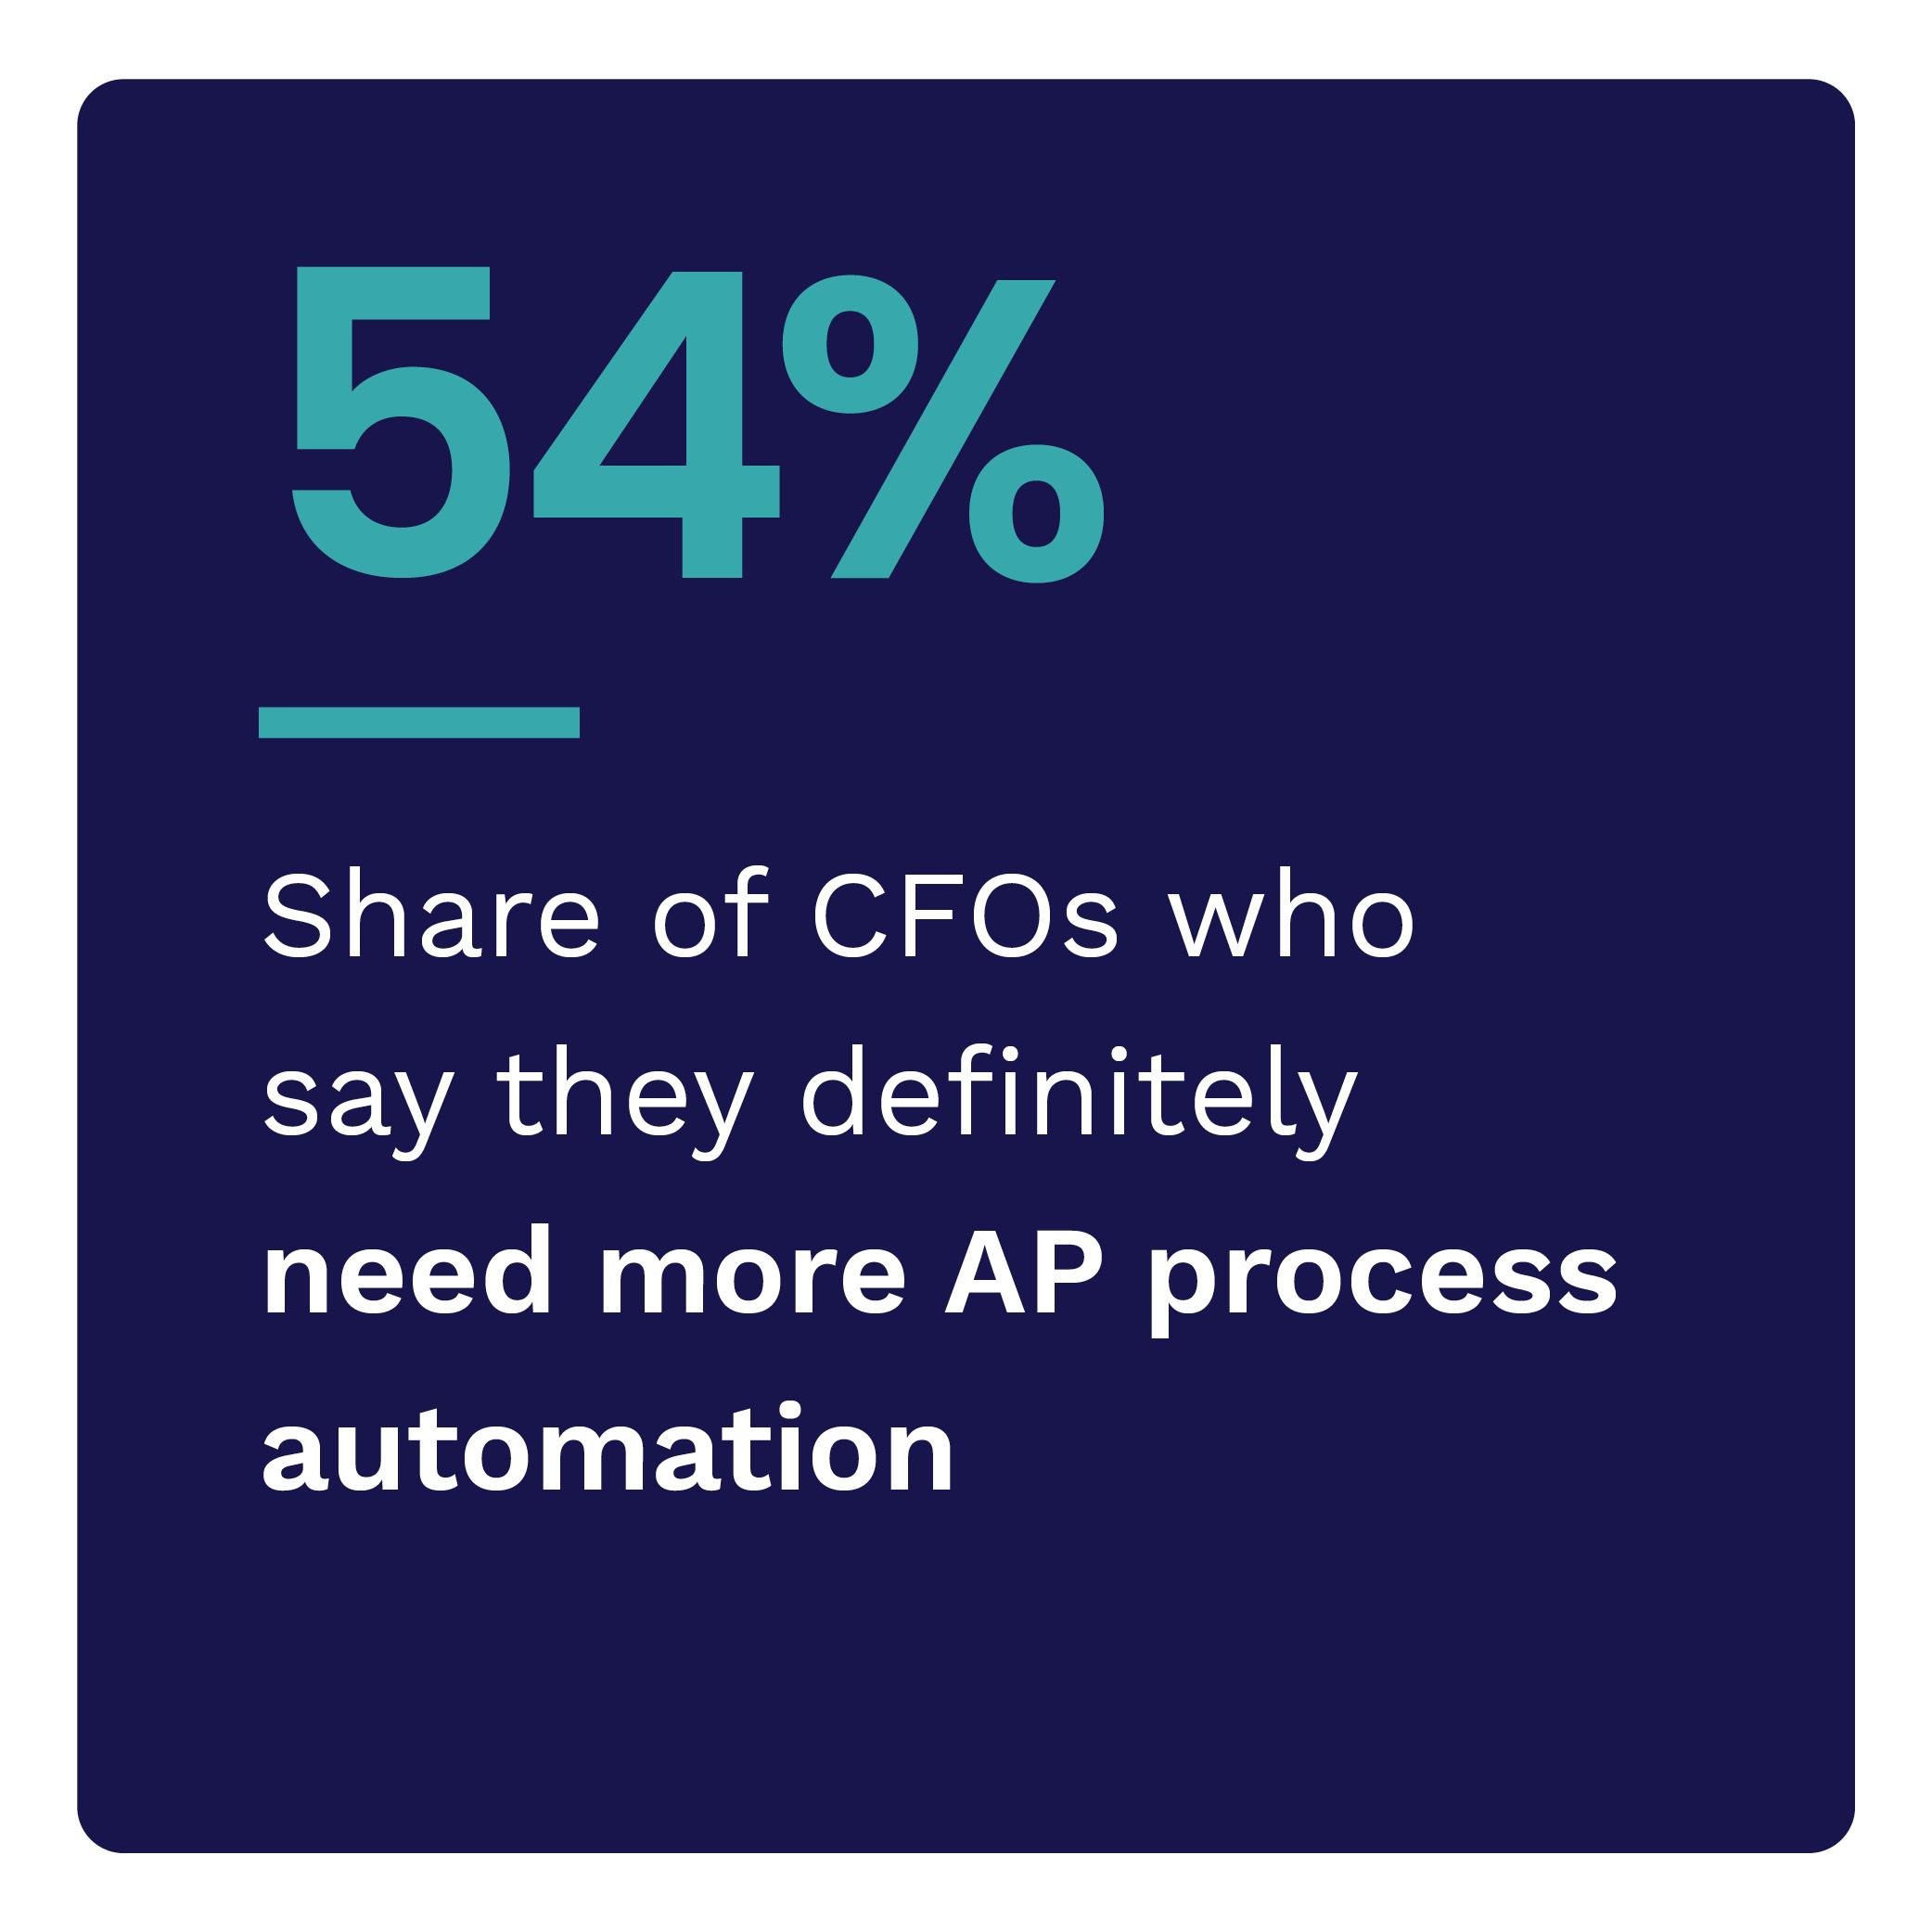 54%: Share of CFOs who say they definitely need more AP process automation